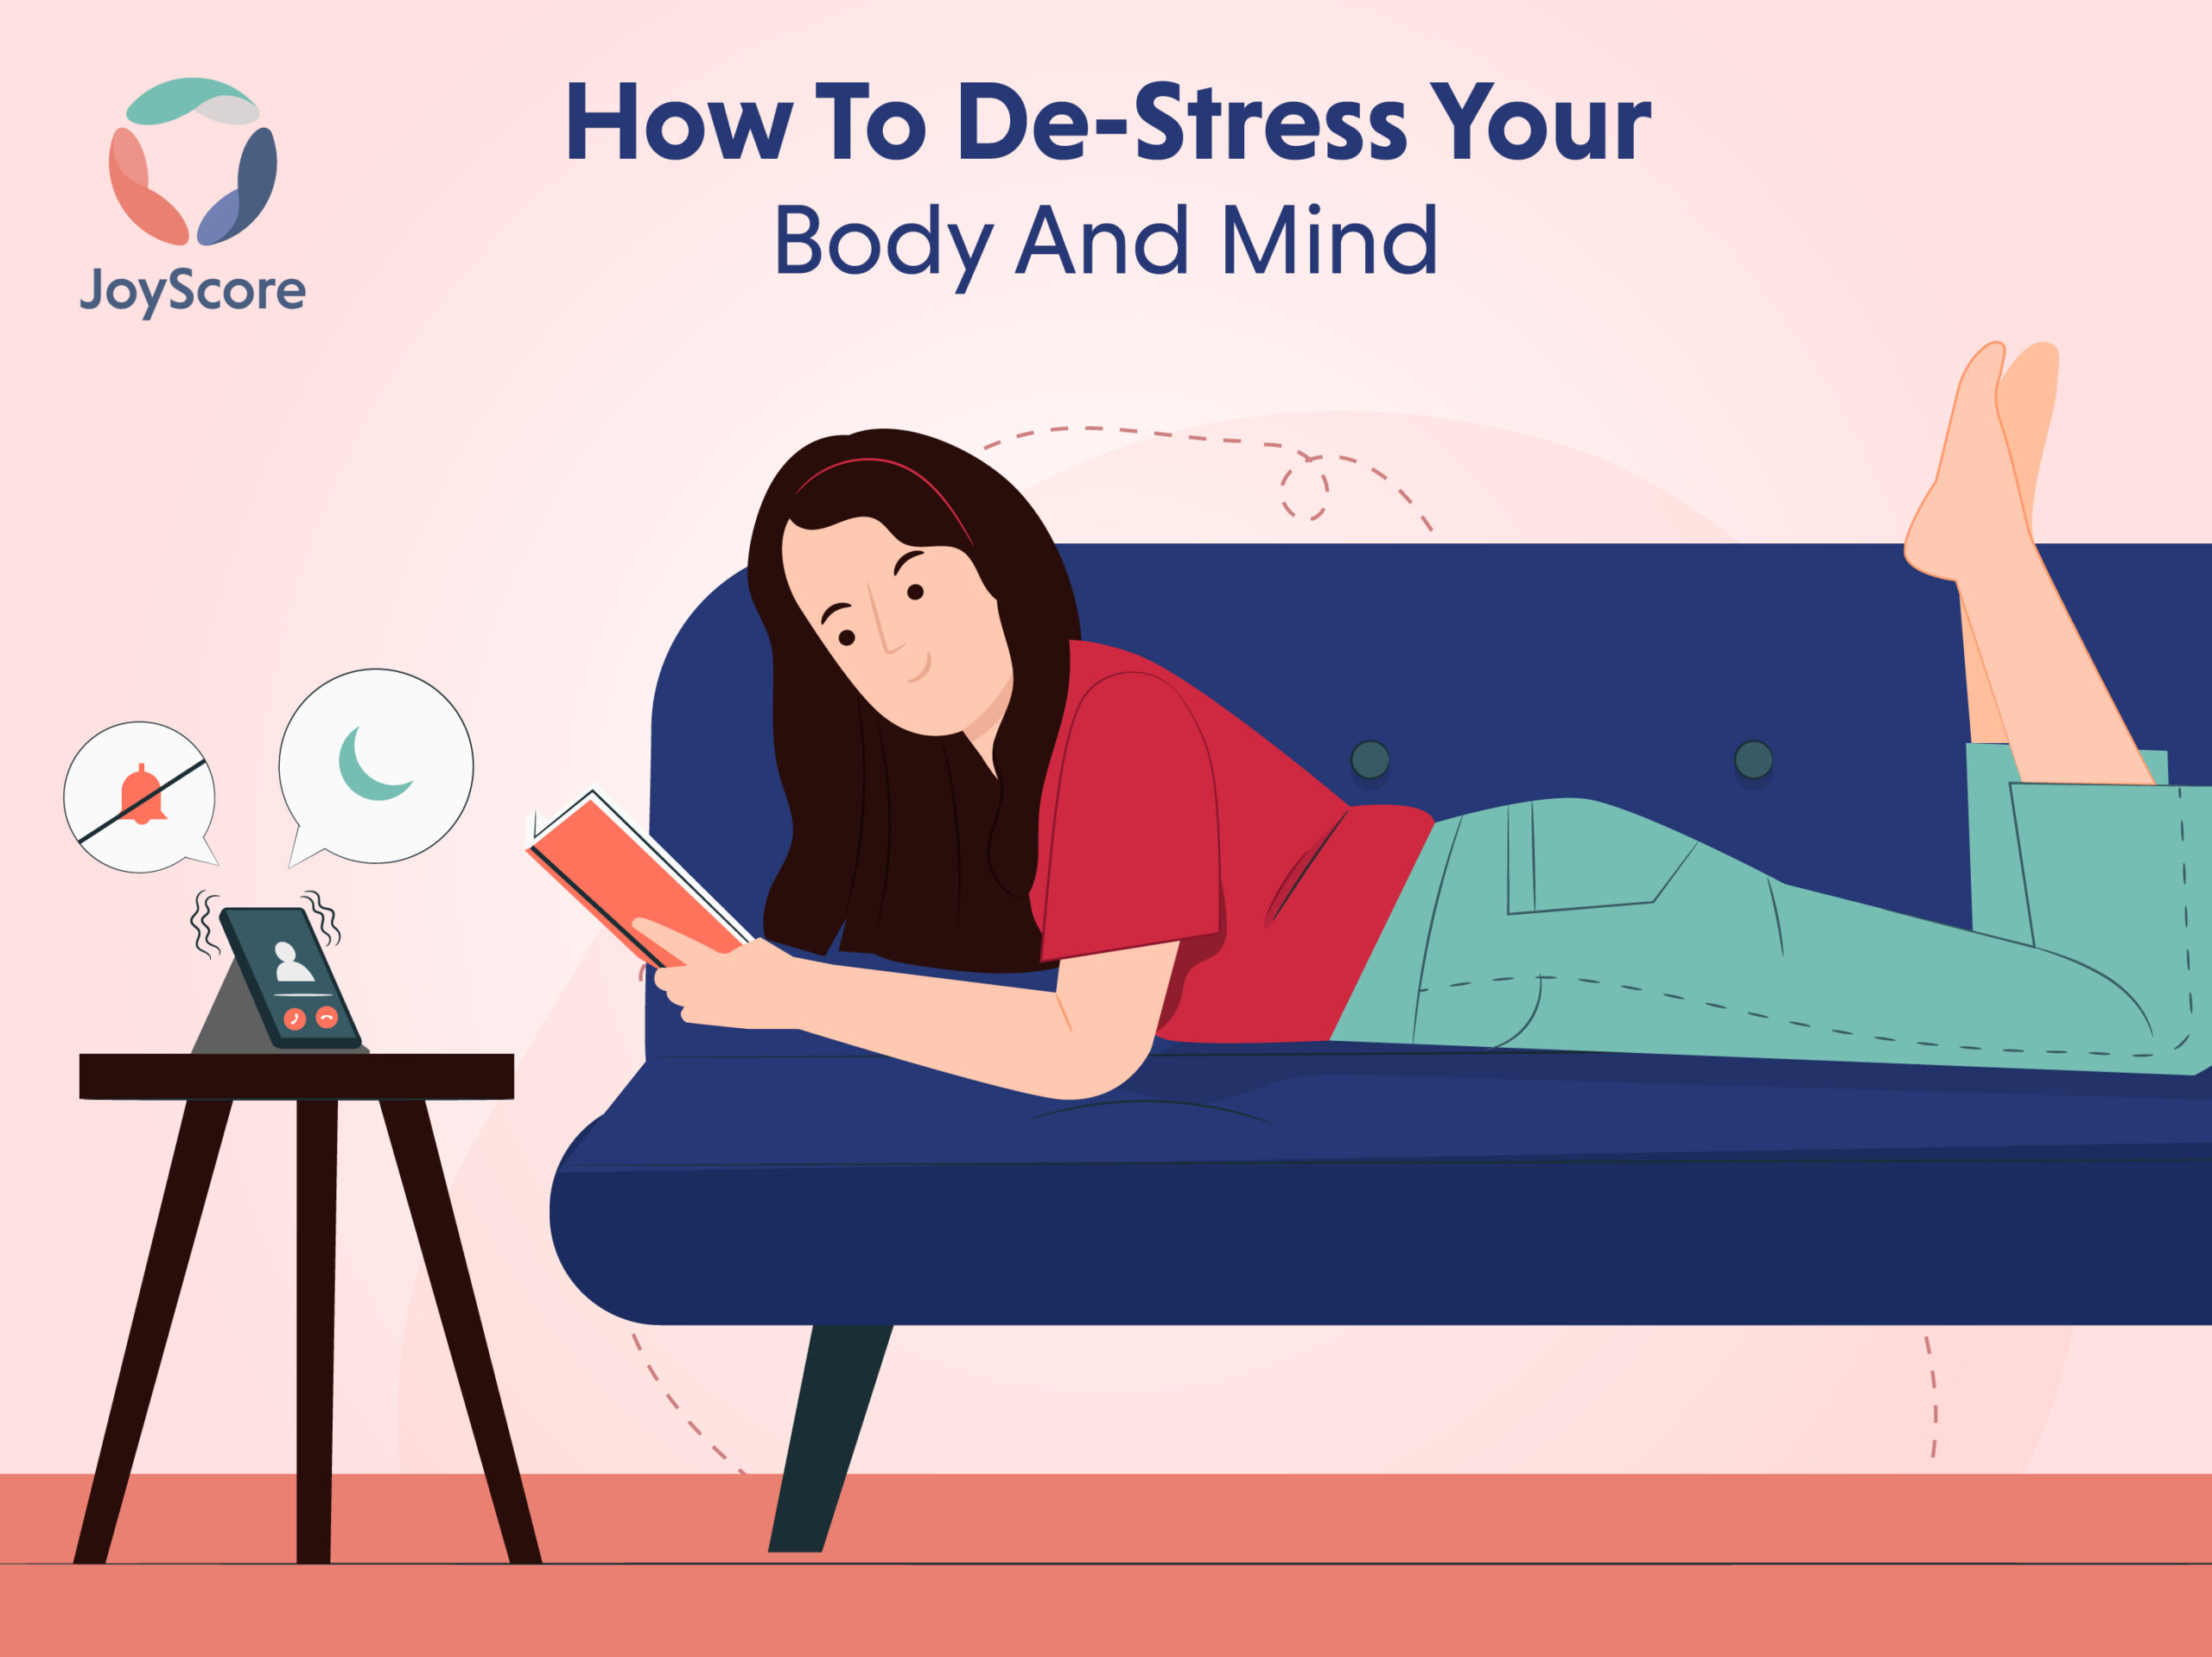 How To De-Stress Your Body And Mind: 10 Simple Tips